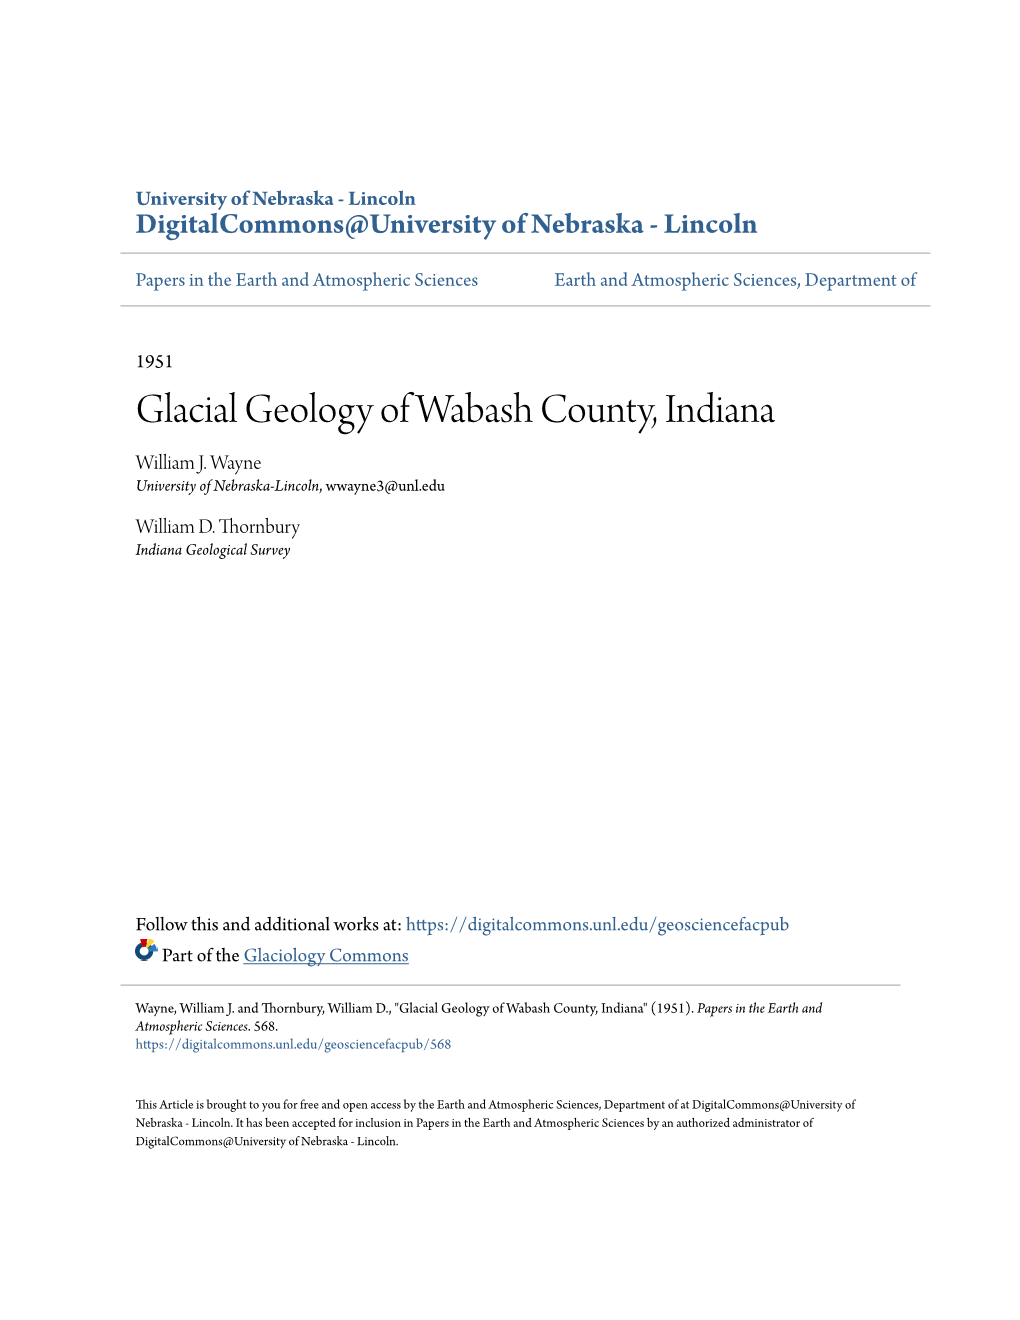 Glacial Geology of Wabash County, Indiana William J